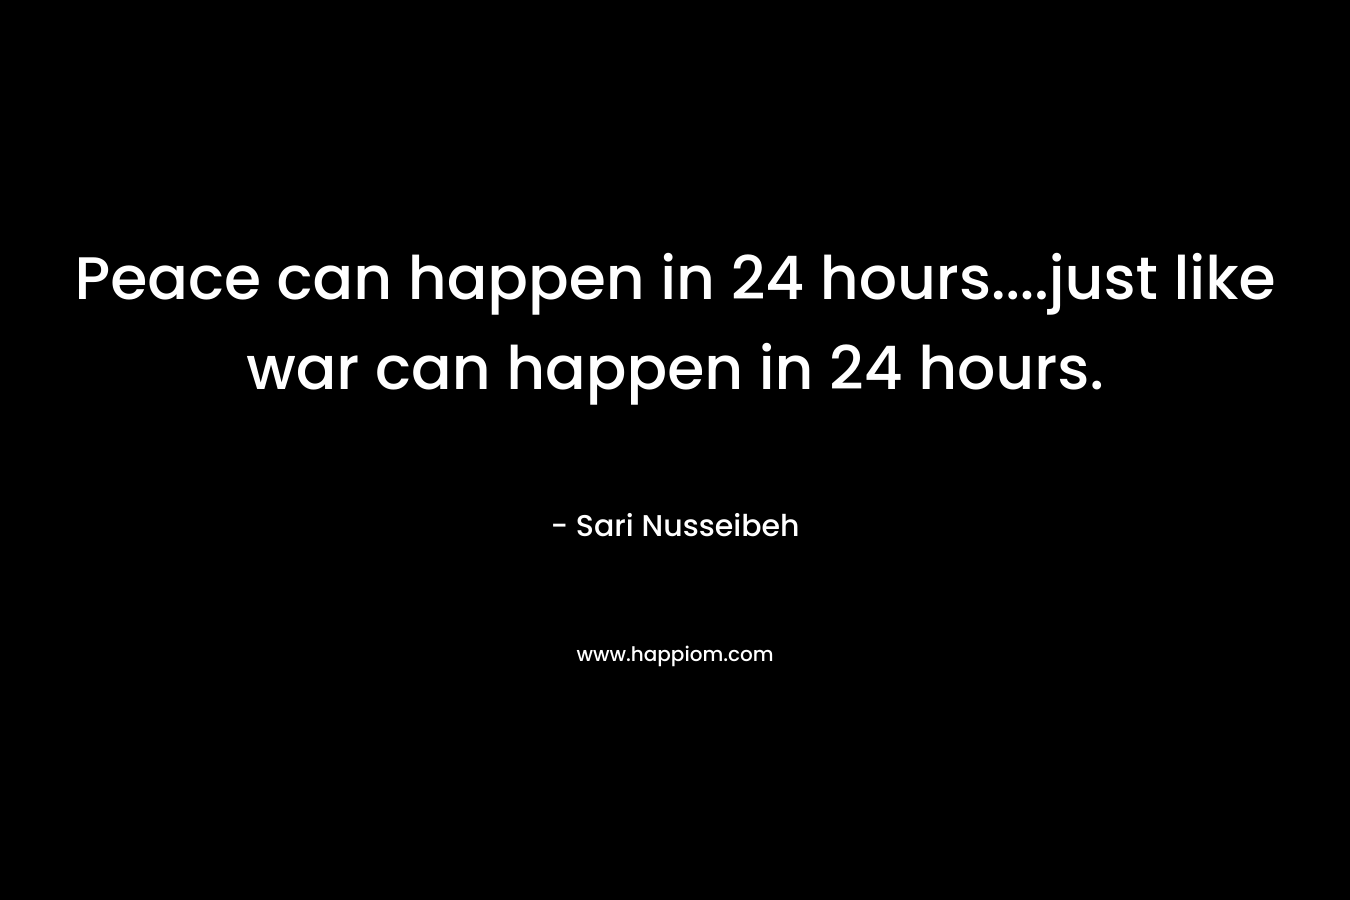 Peace can happen in 24 hours....just like war can happen in 24 hours.